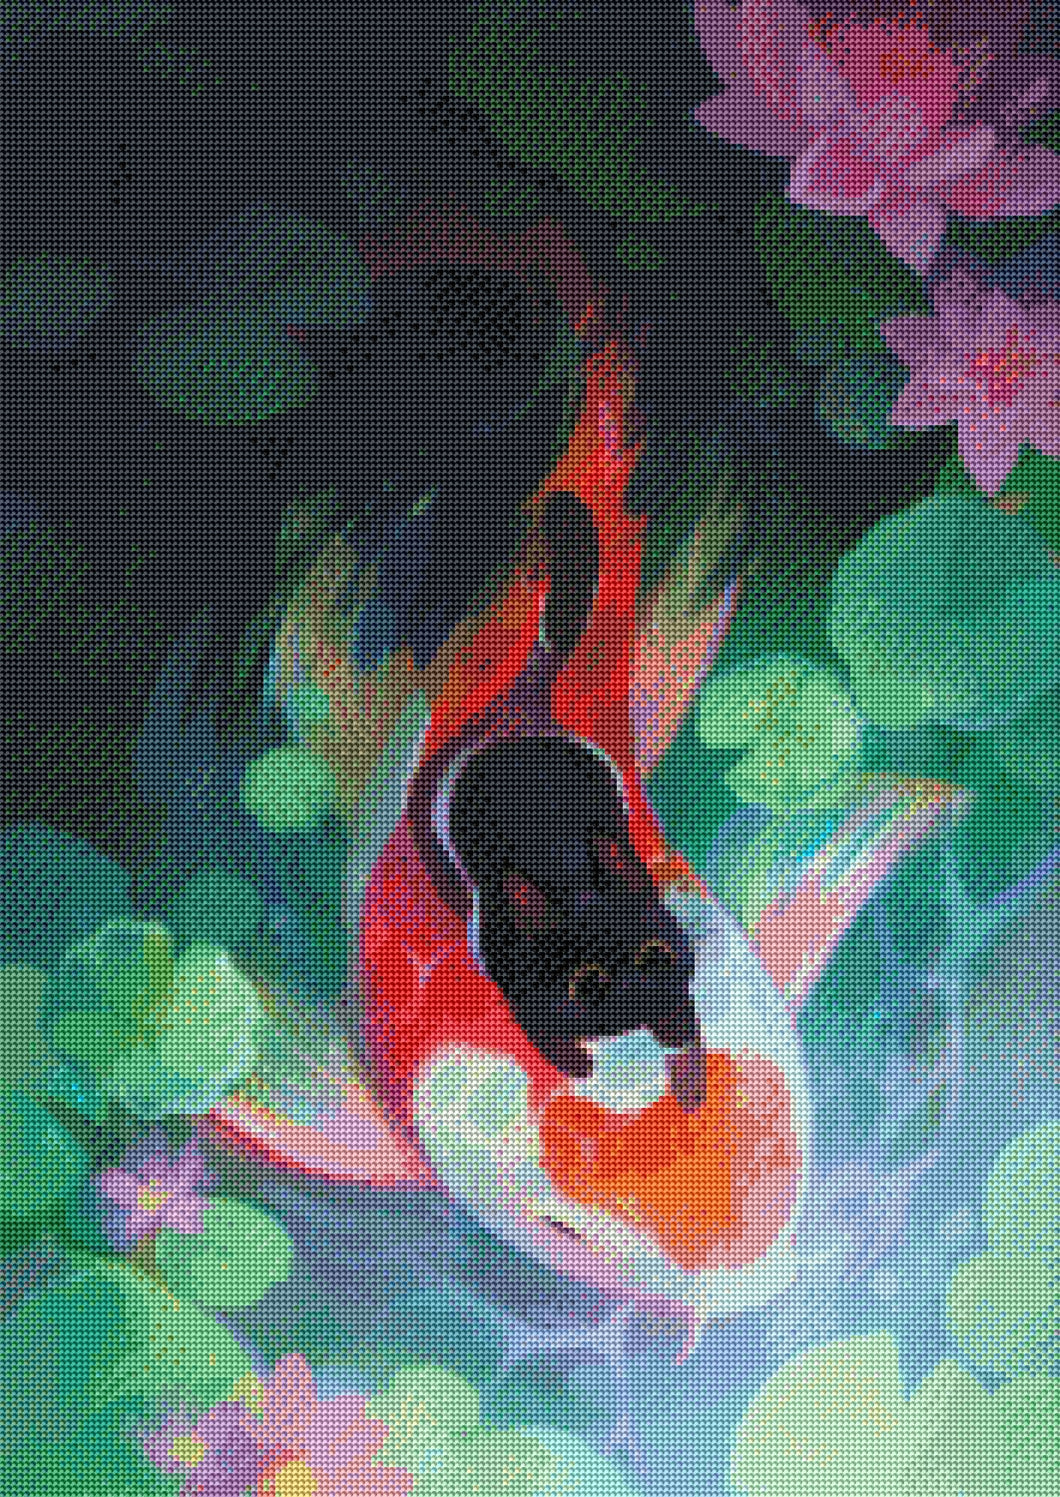 *PREORDER* Koi Pond by XiongHea